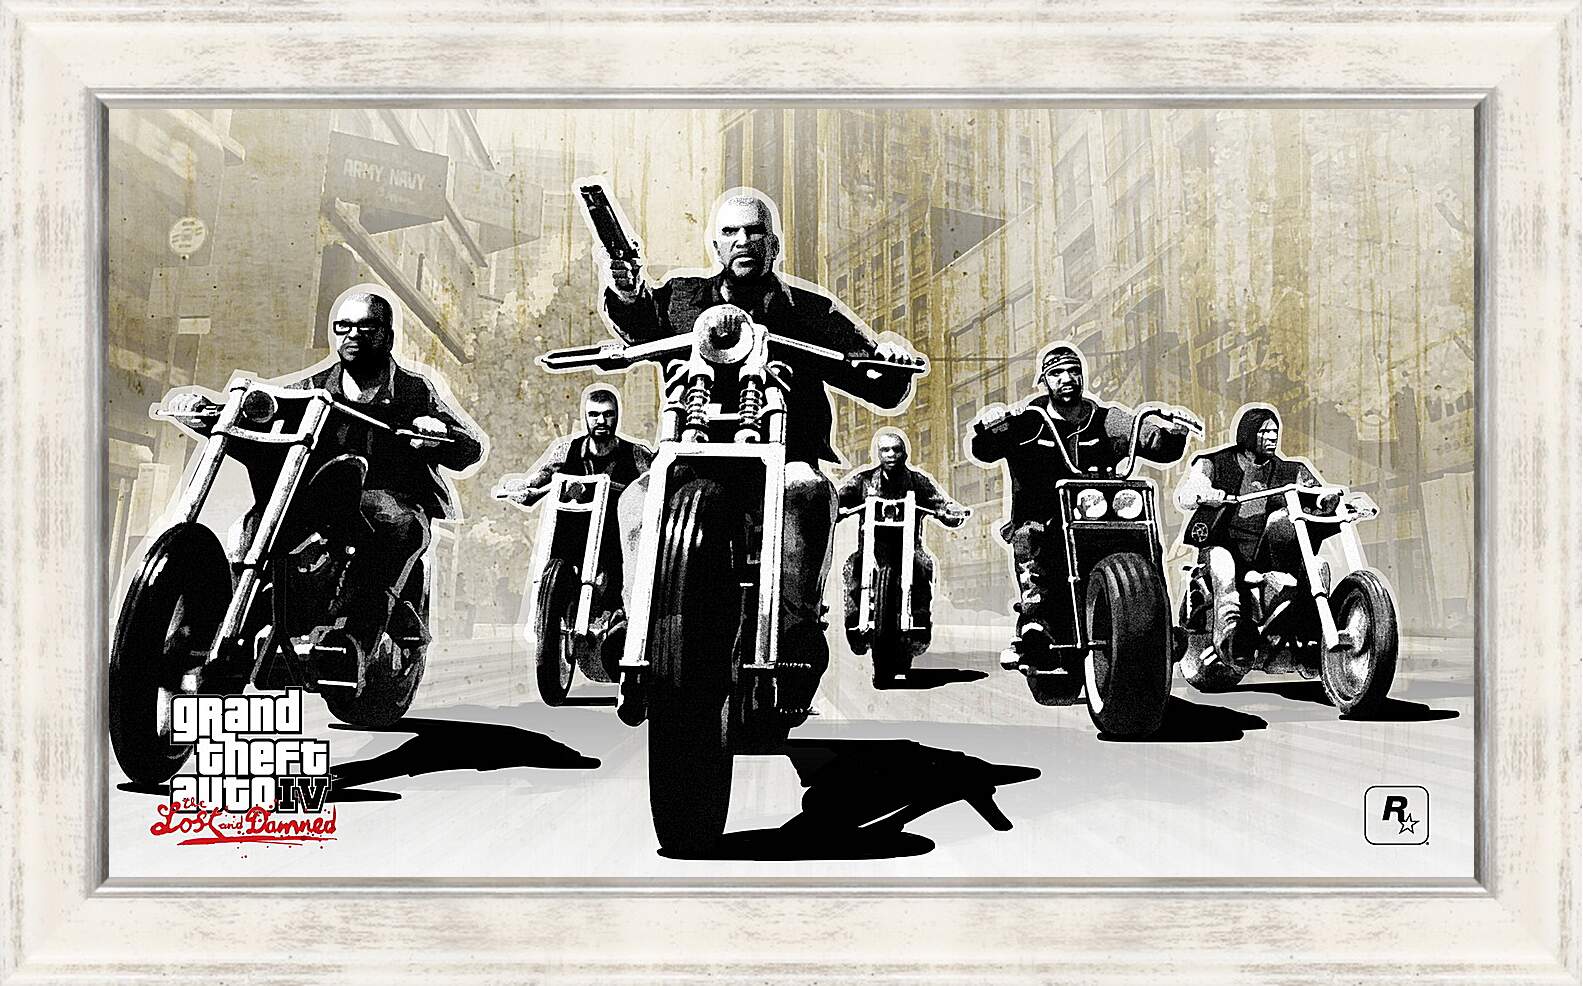 Картина в раме - gta 4 lost and damned, grand theft auto 4 lost and damned, bikers
